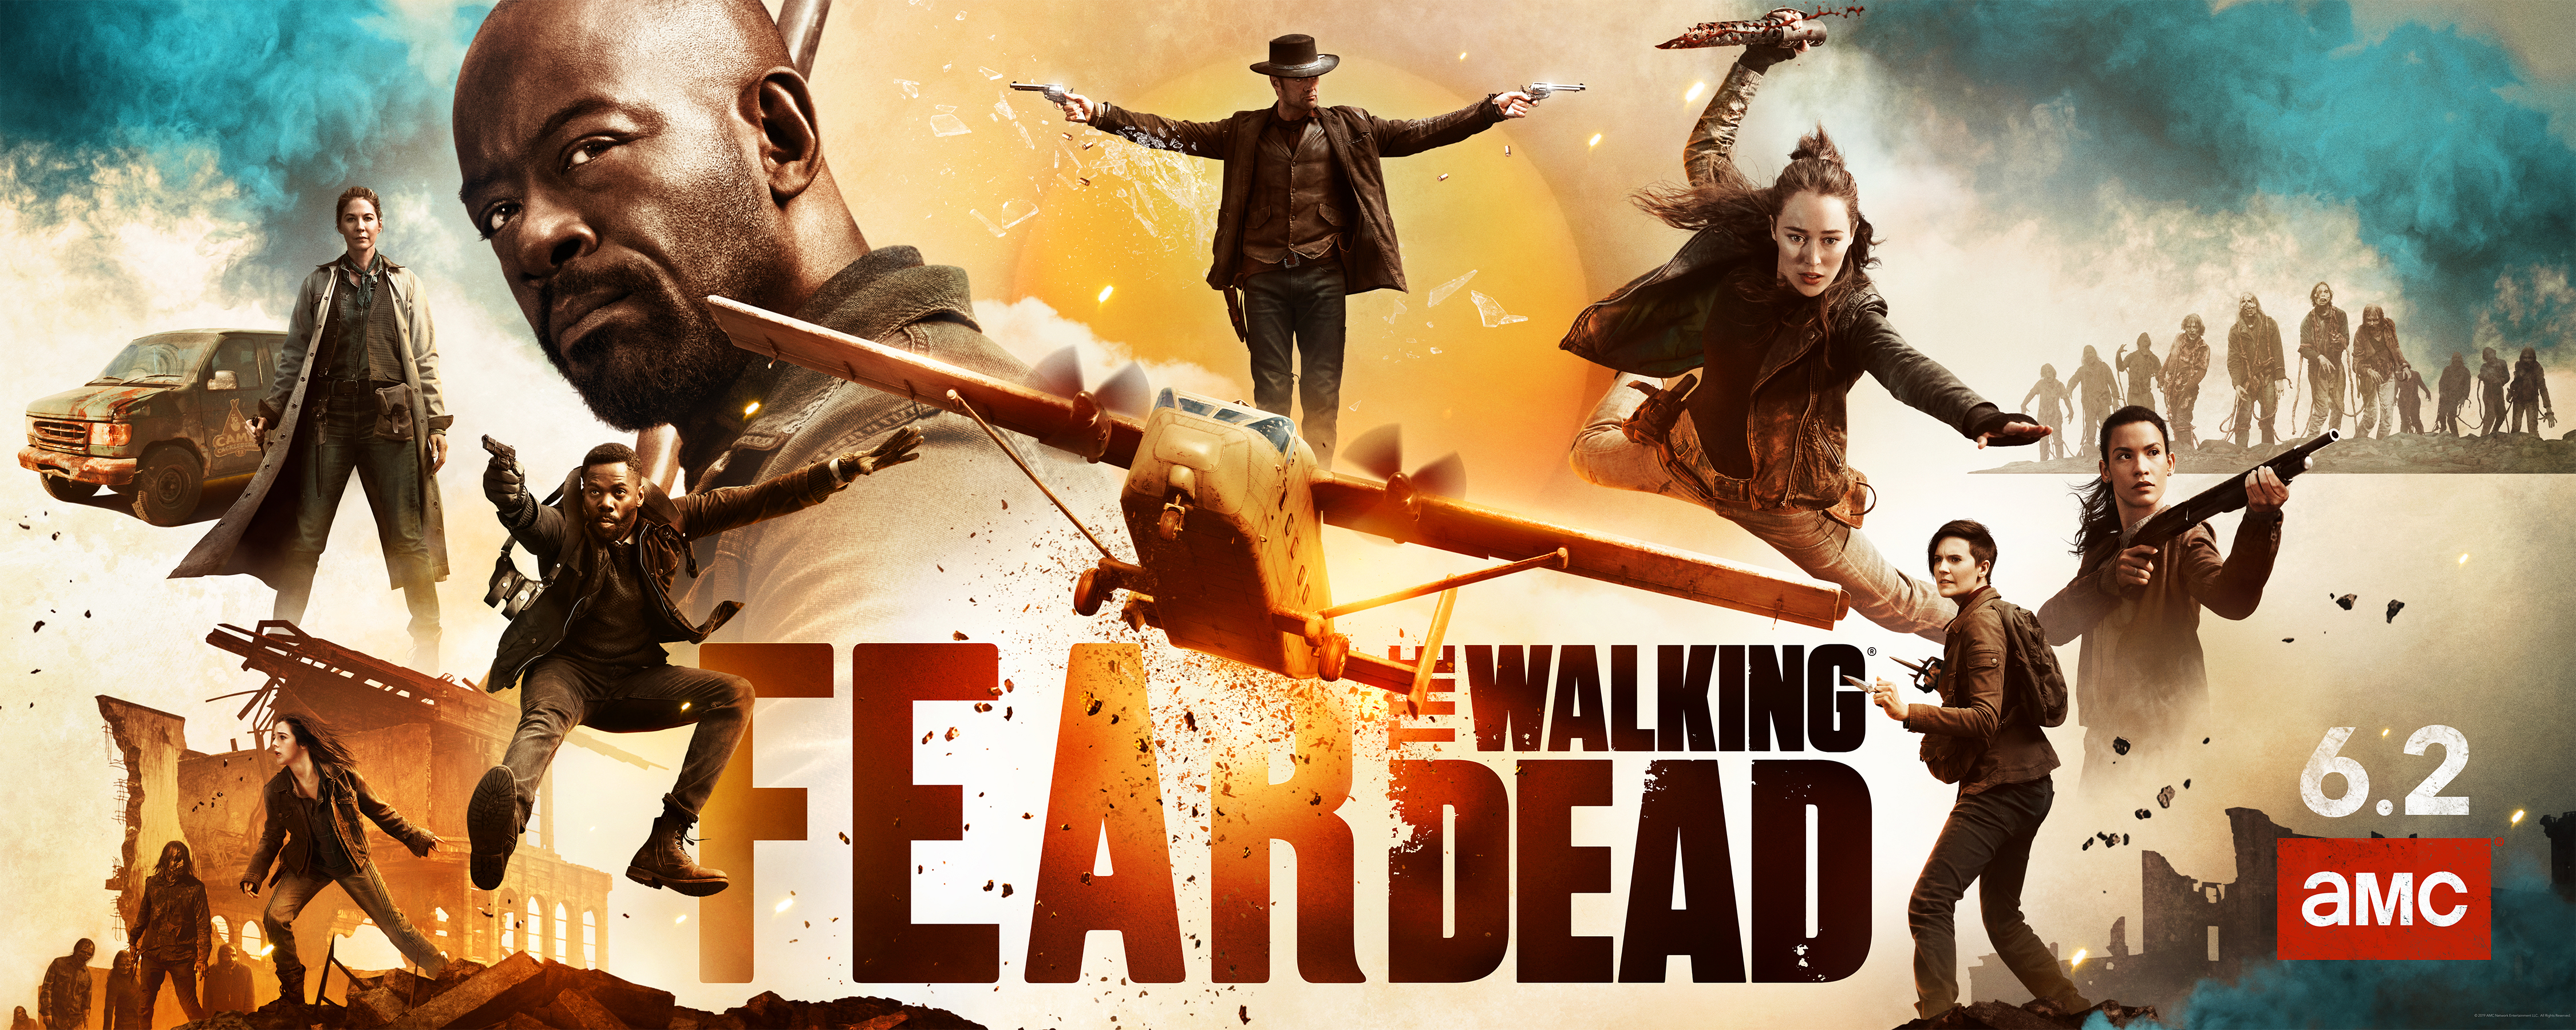 AMC Releases New Fear TWD Poster - Skybound Entertainment